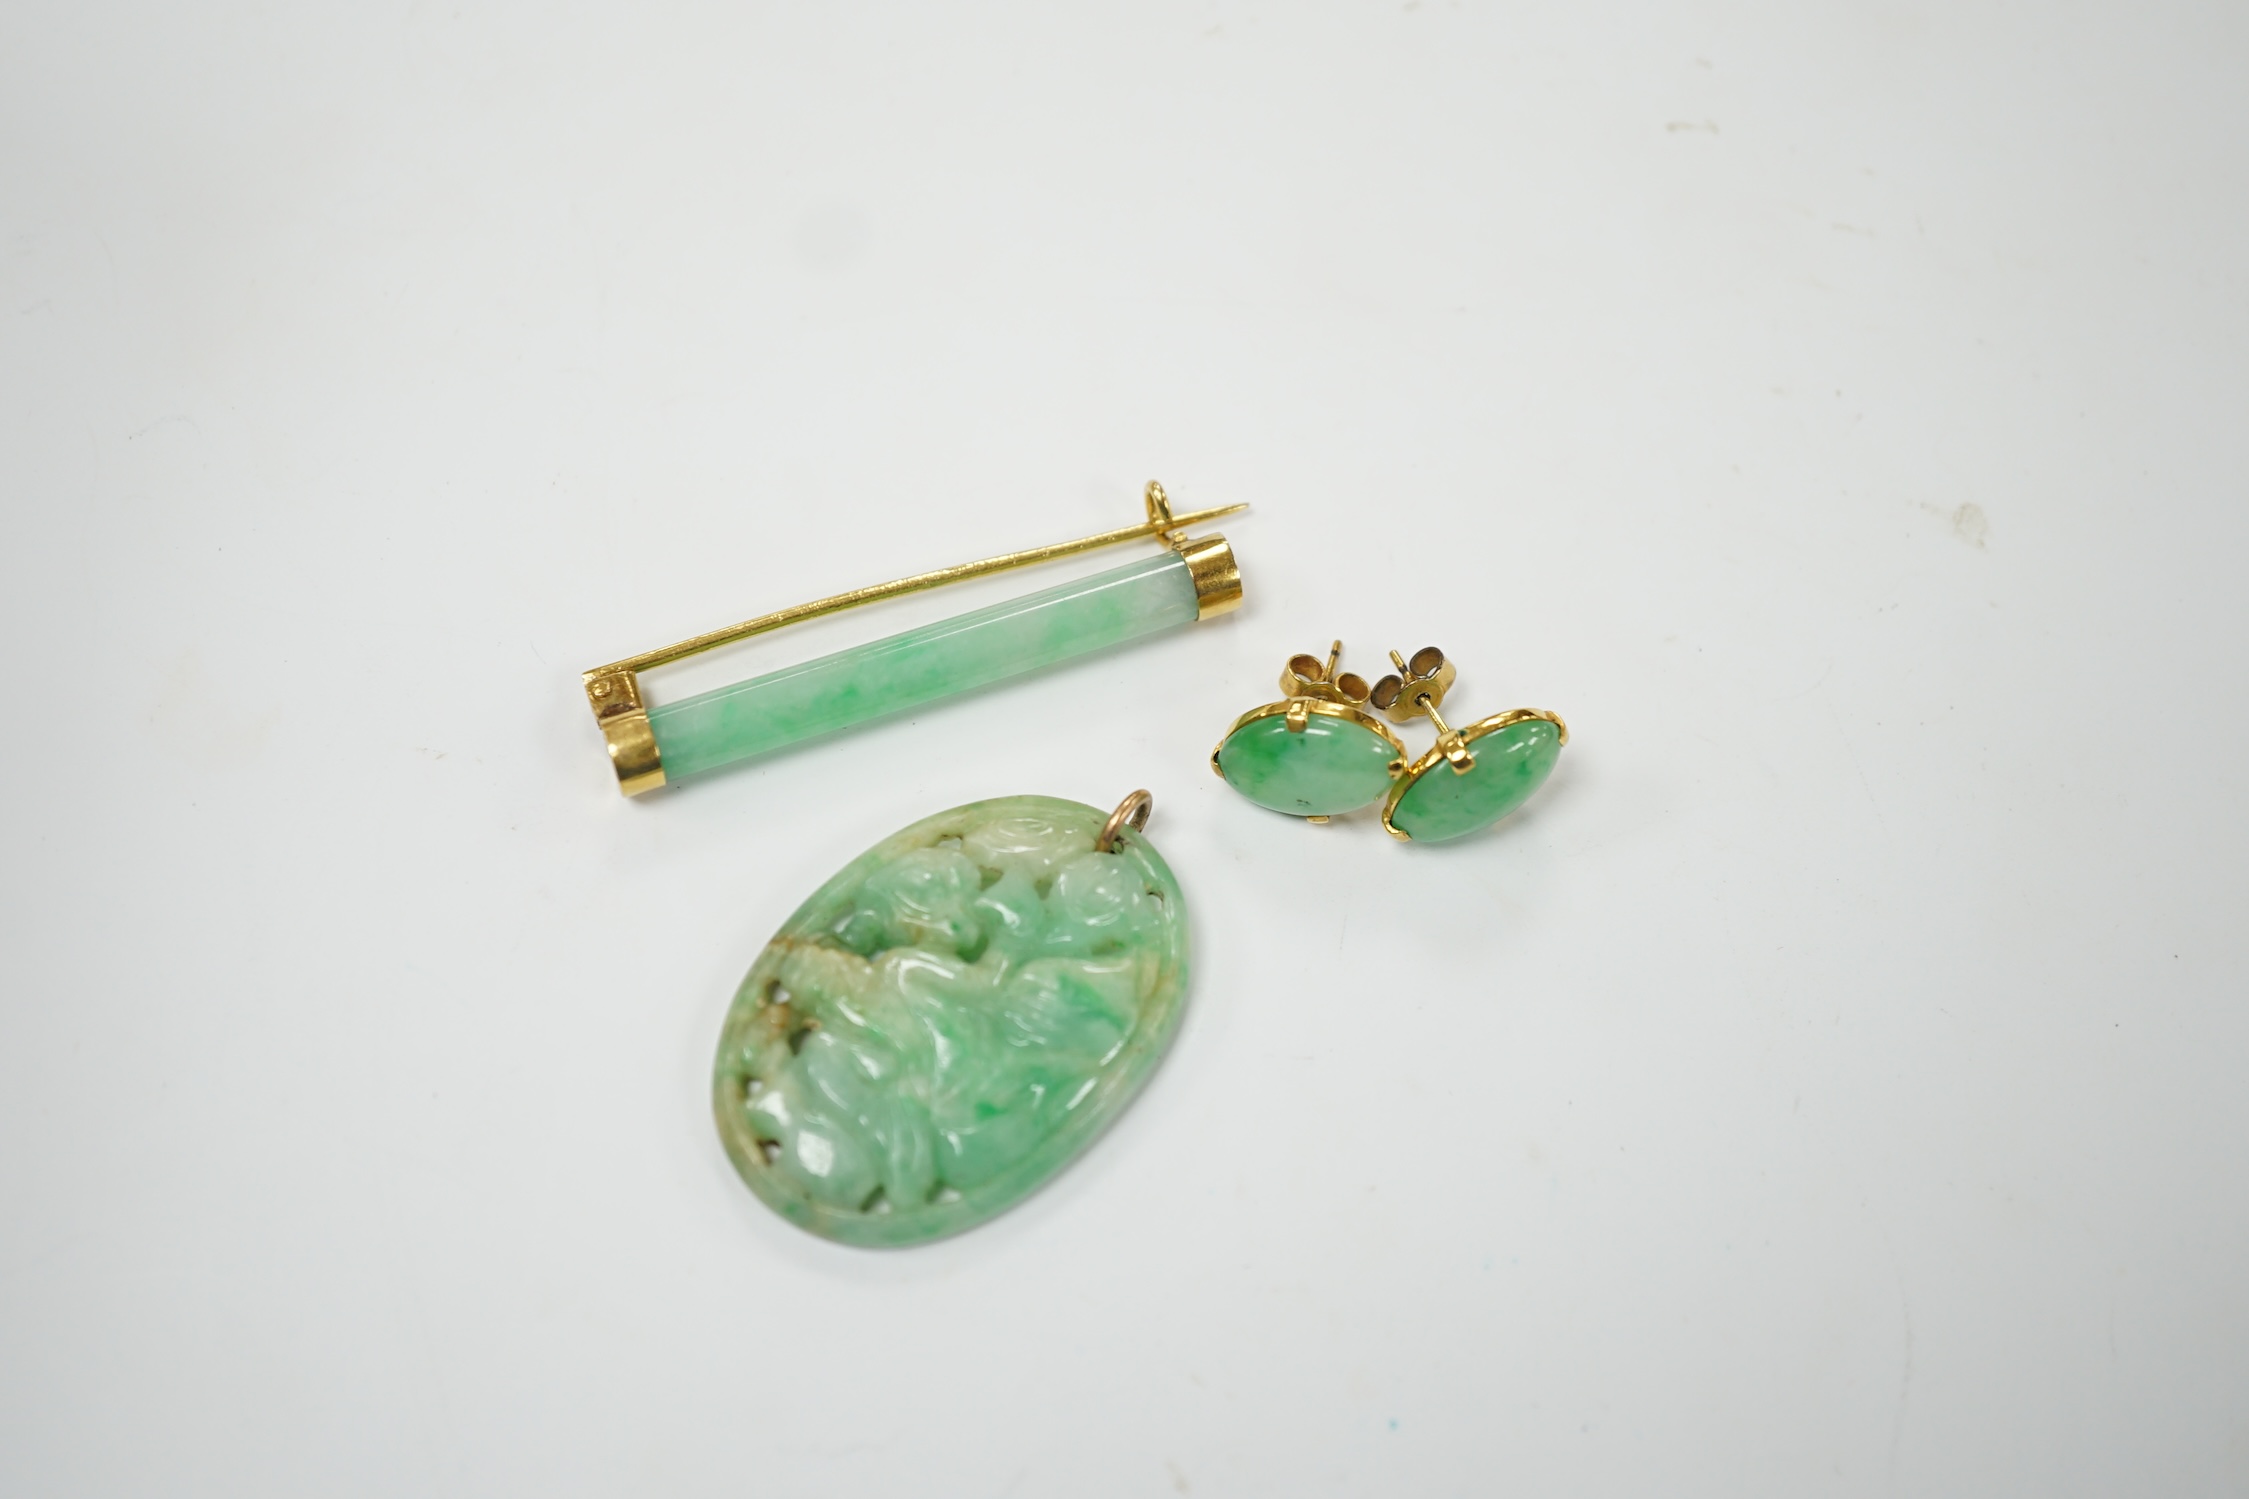 A Chinese yellow metal(stamped 18) mounted jade bar brooch, 48mm, a carved jade pendant and a pair of yellow metal mounted oval jade earrings, gross weight 19.9 grams. Fair to good condition.